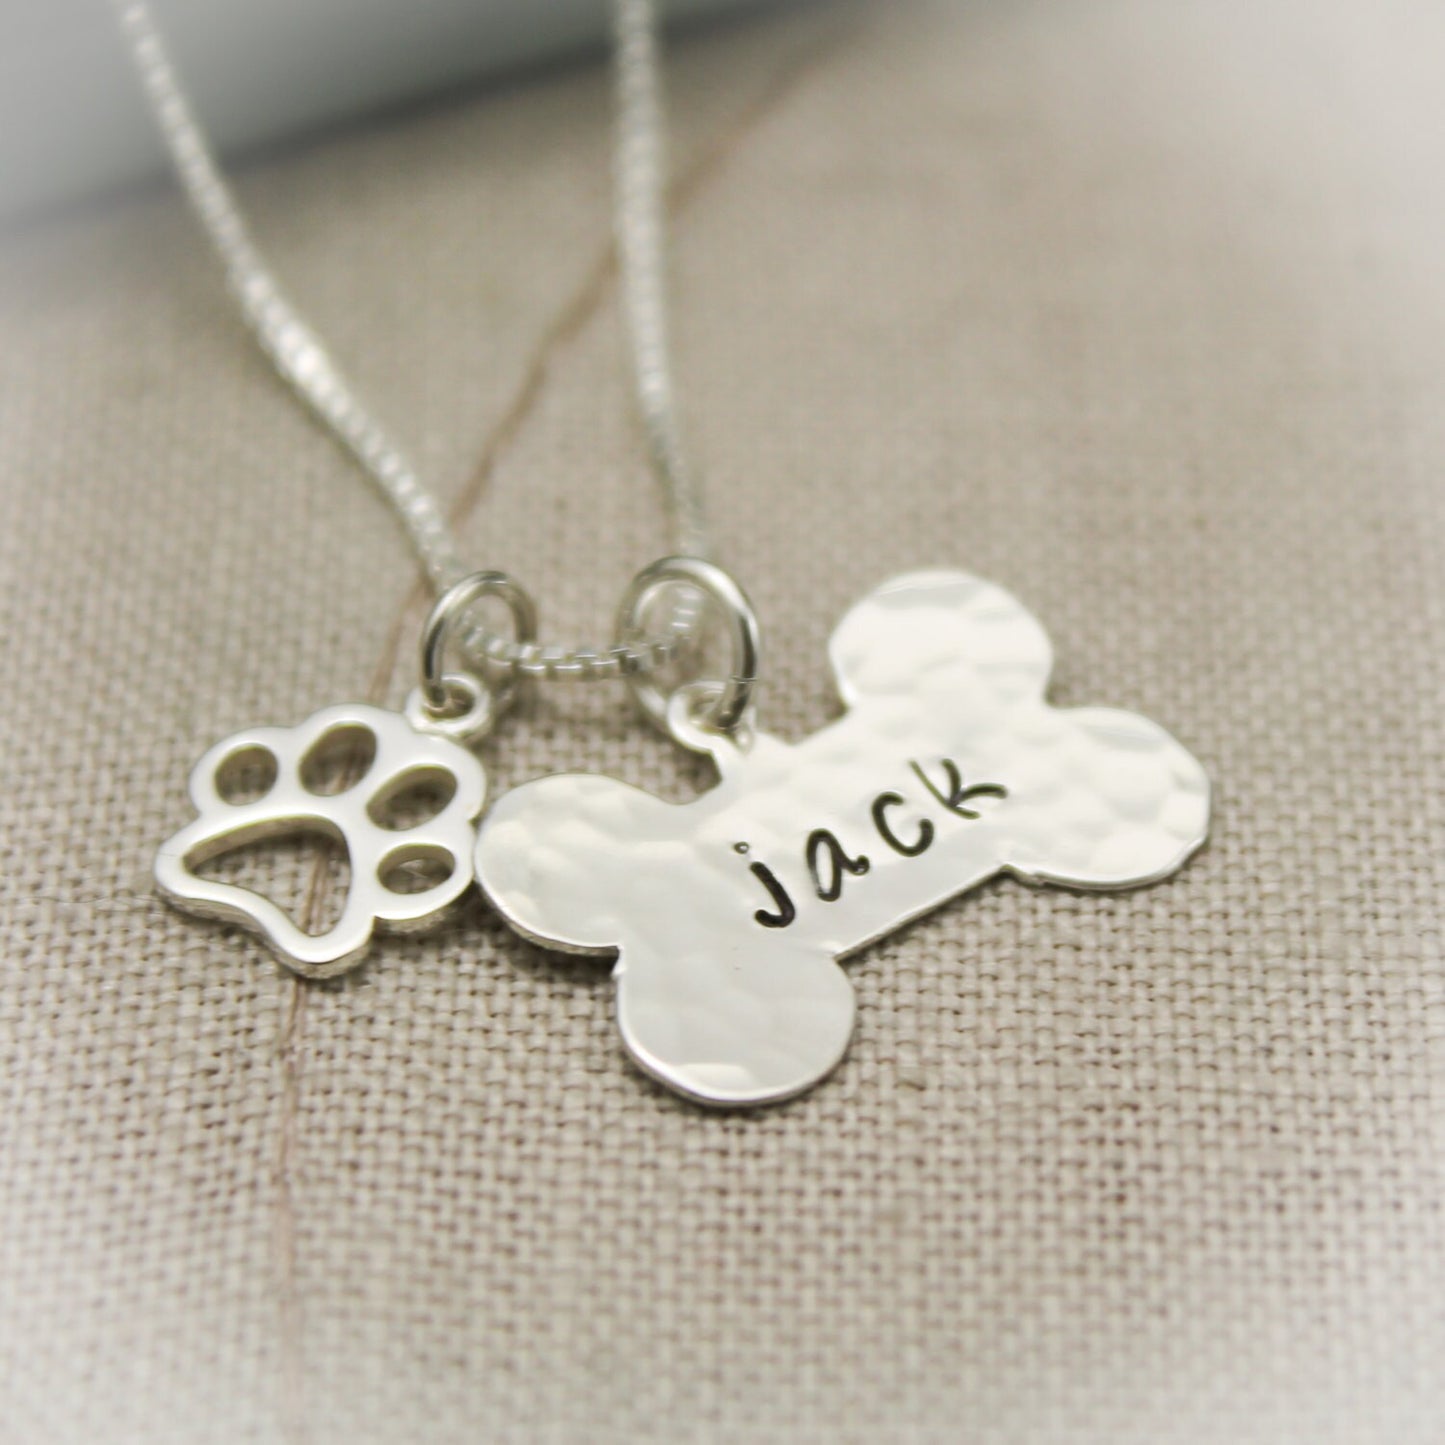 Dog Bone with Paw Charm Hand Stamped Personalized Necklace in Sterling Silver